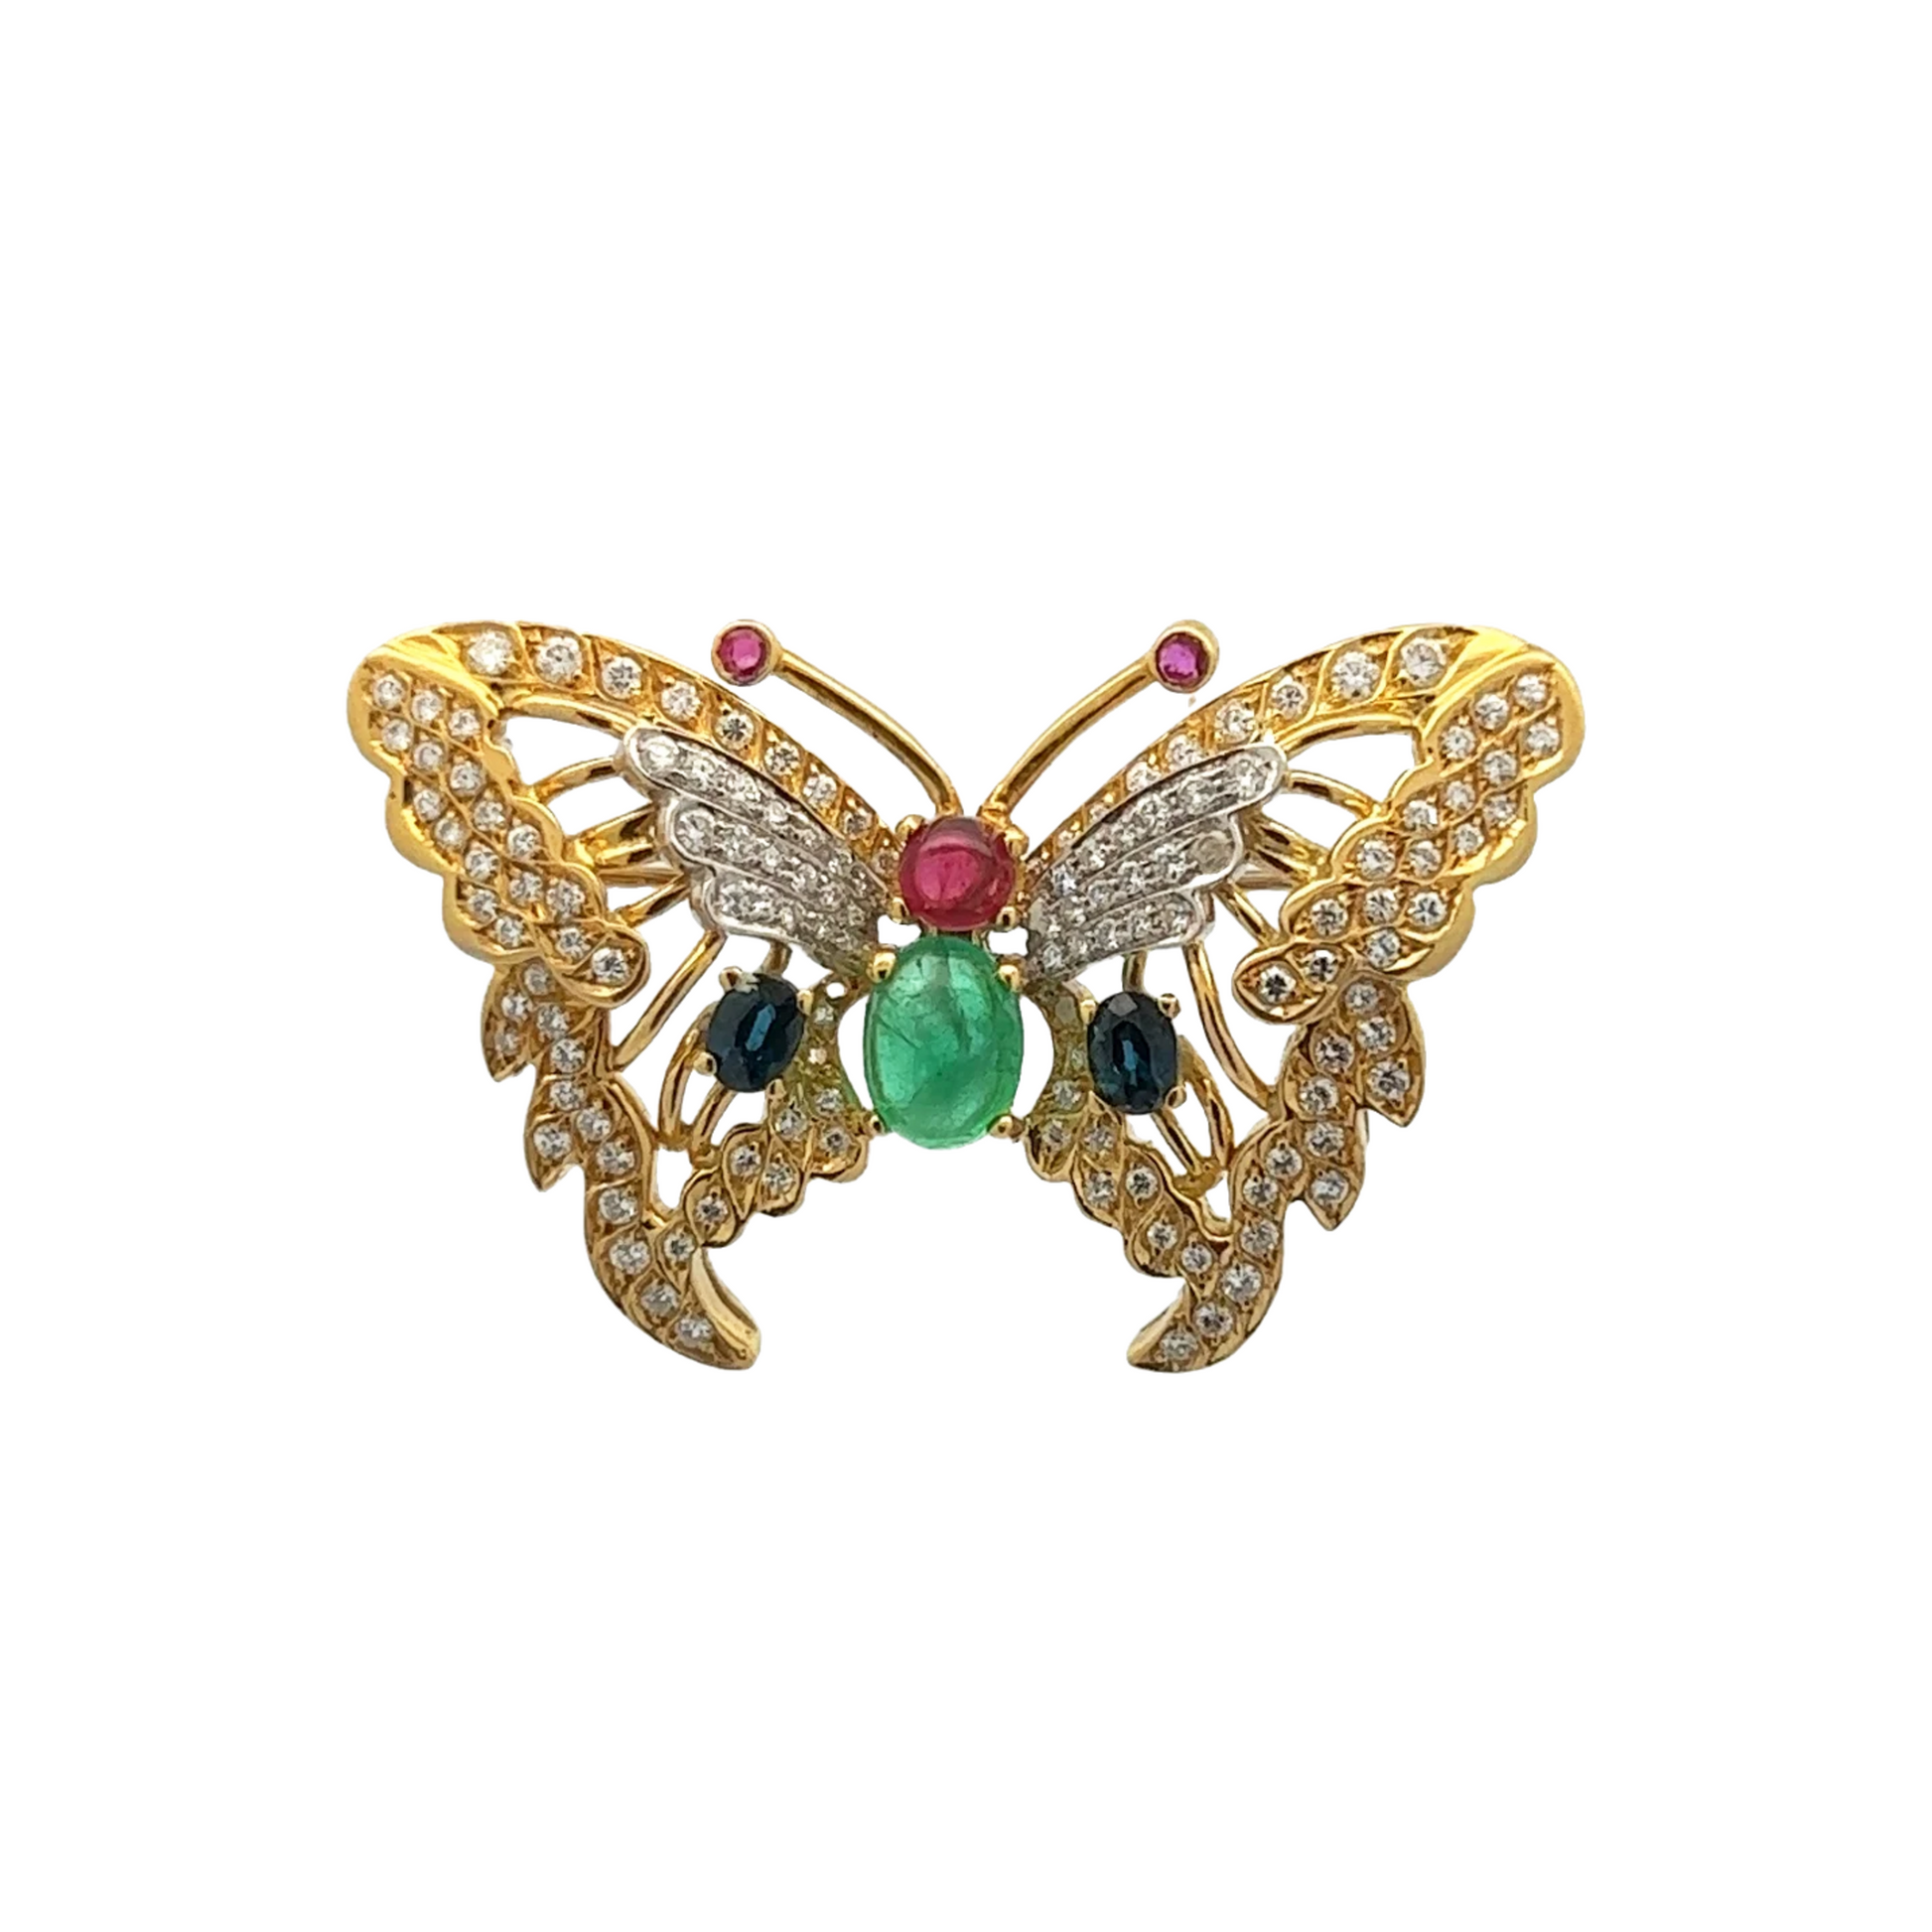 1970s 18KT Yellow Gold Diamond, Emerald, Ruby & Sapphire Butterfly Brooch front